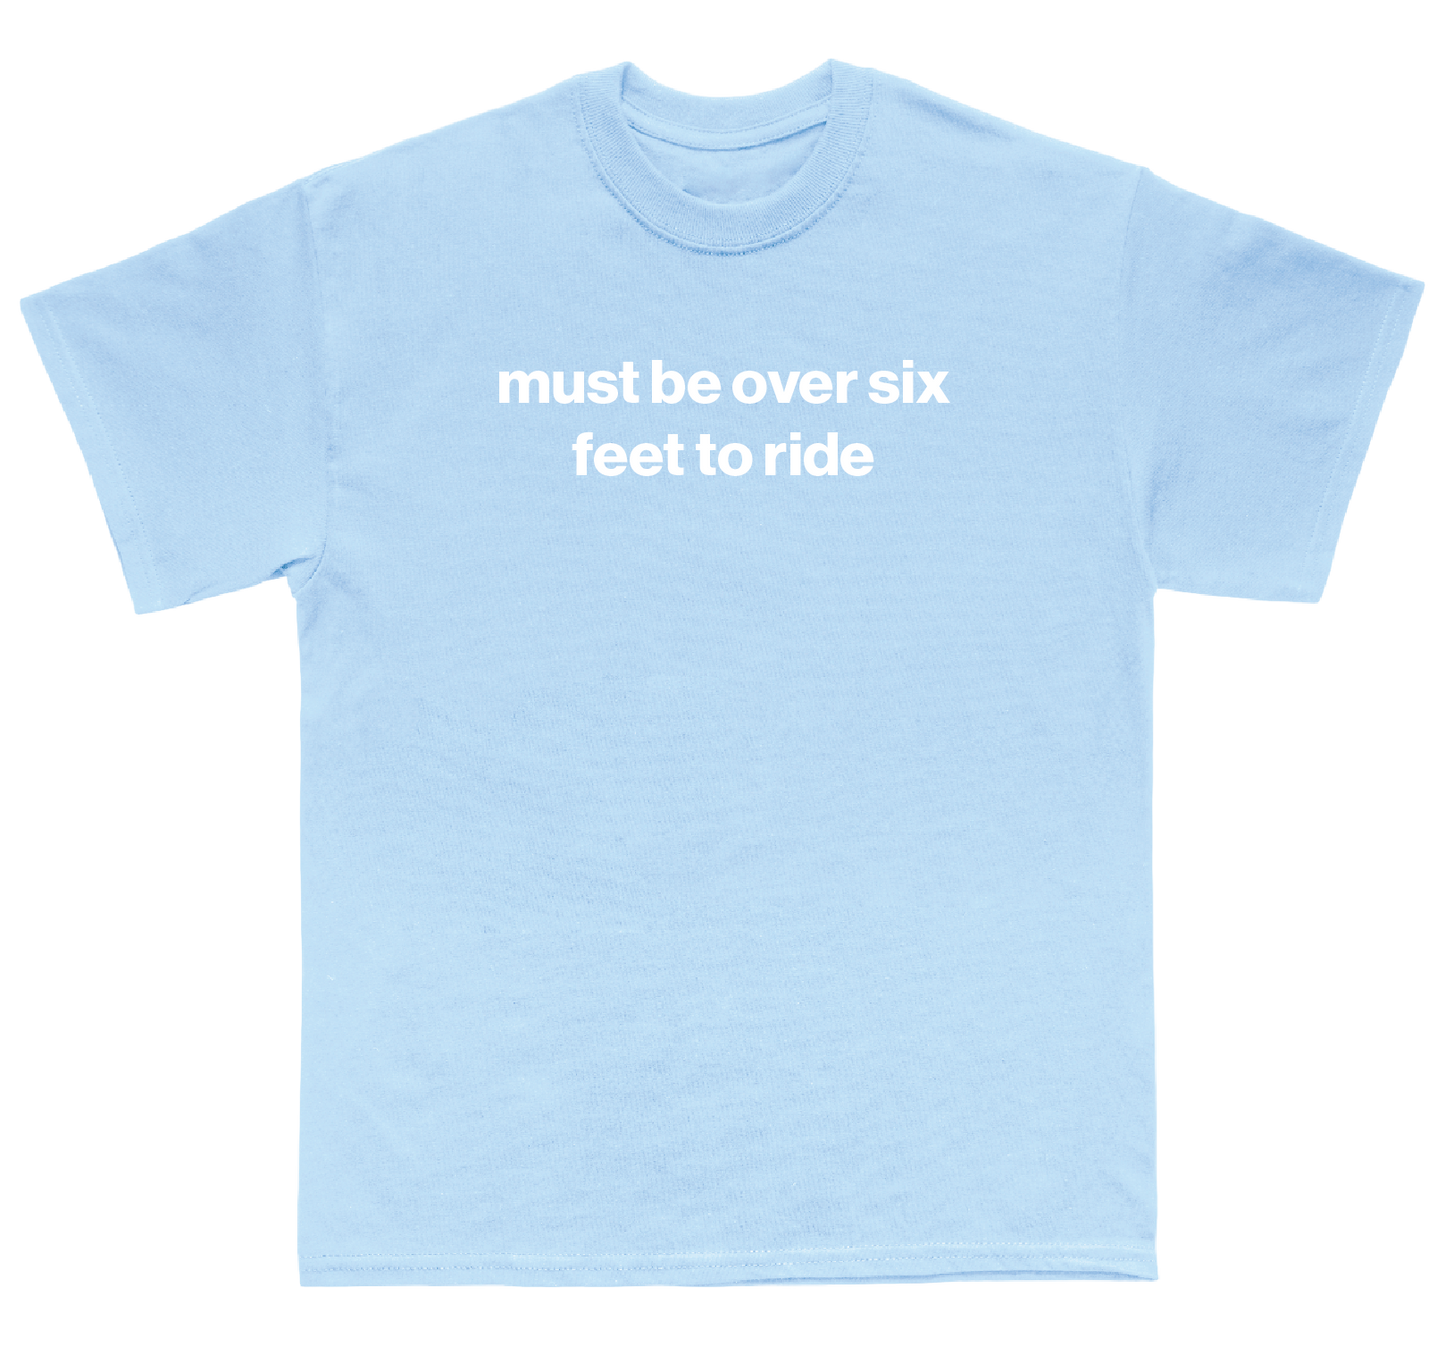 must be over six feet to ride shirt